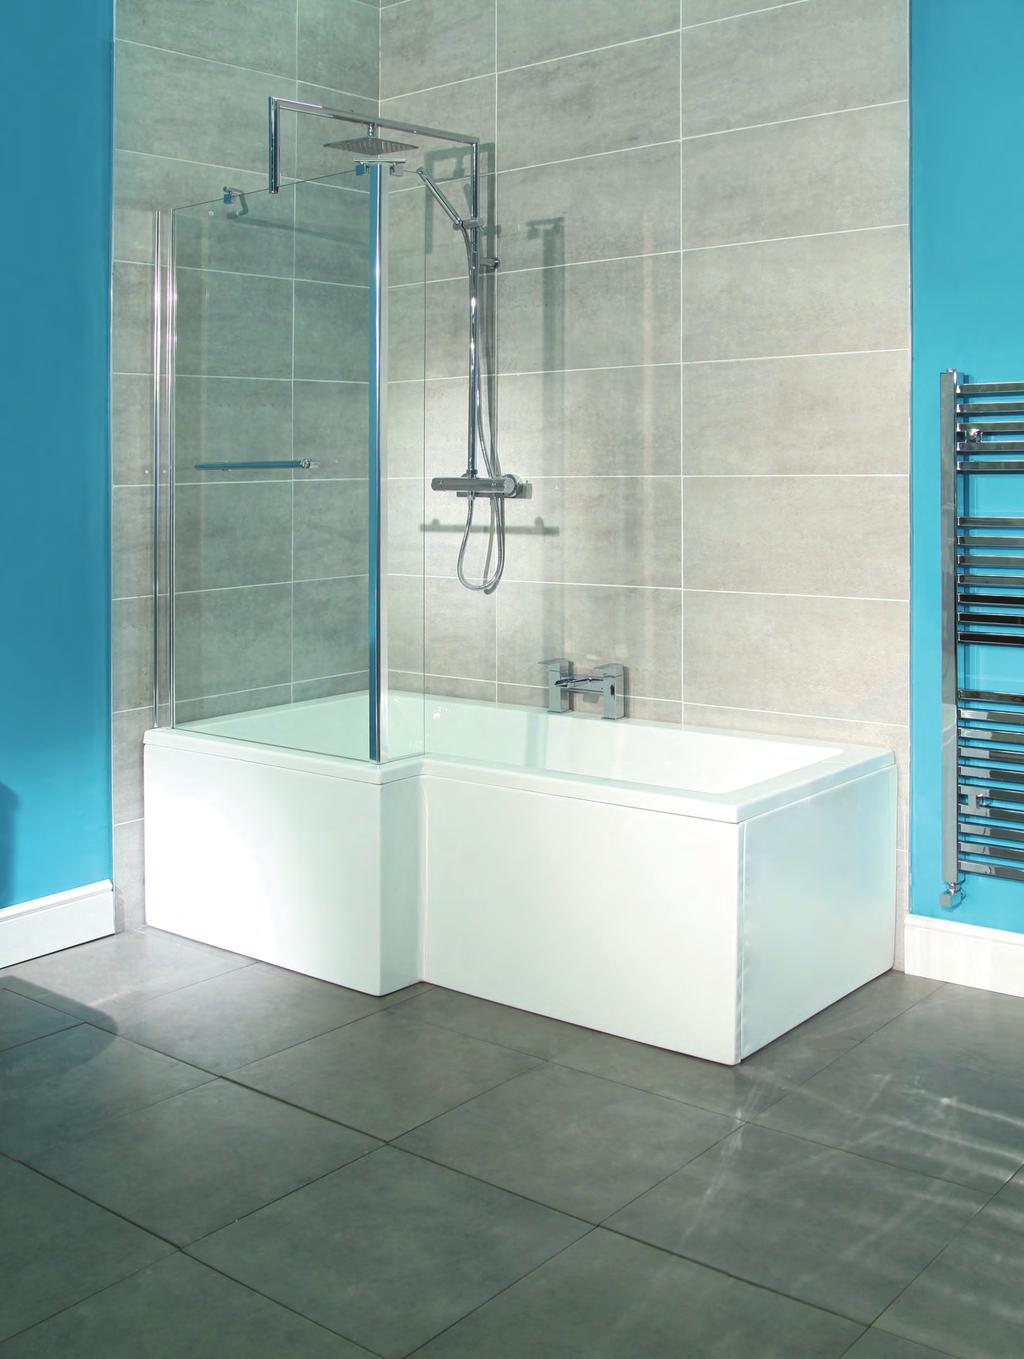 BATHS - Shower Baths Shower Baths If you re re-fitting your bathroom and find yourself a little short of space but simply can t choose between a shower enclosure and a bath, you might be wise to